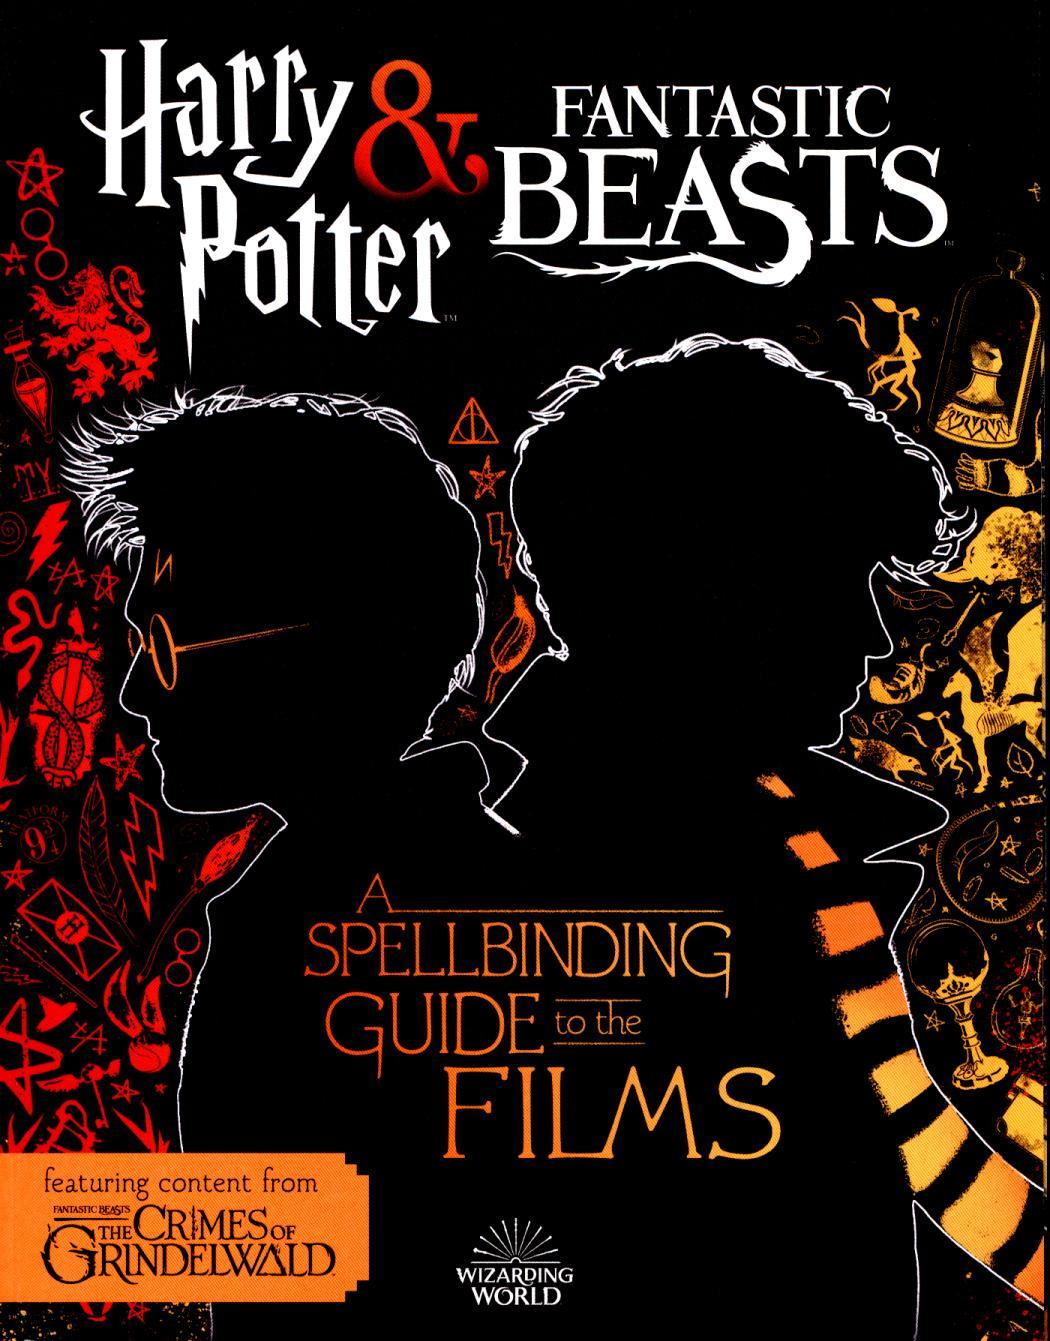 Harry Potter & Fantastic Beasts: A Spellbinding Guide to the